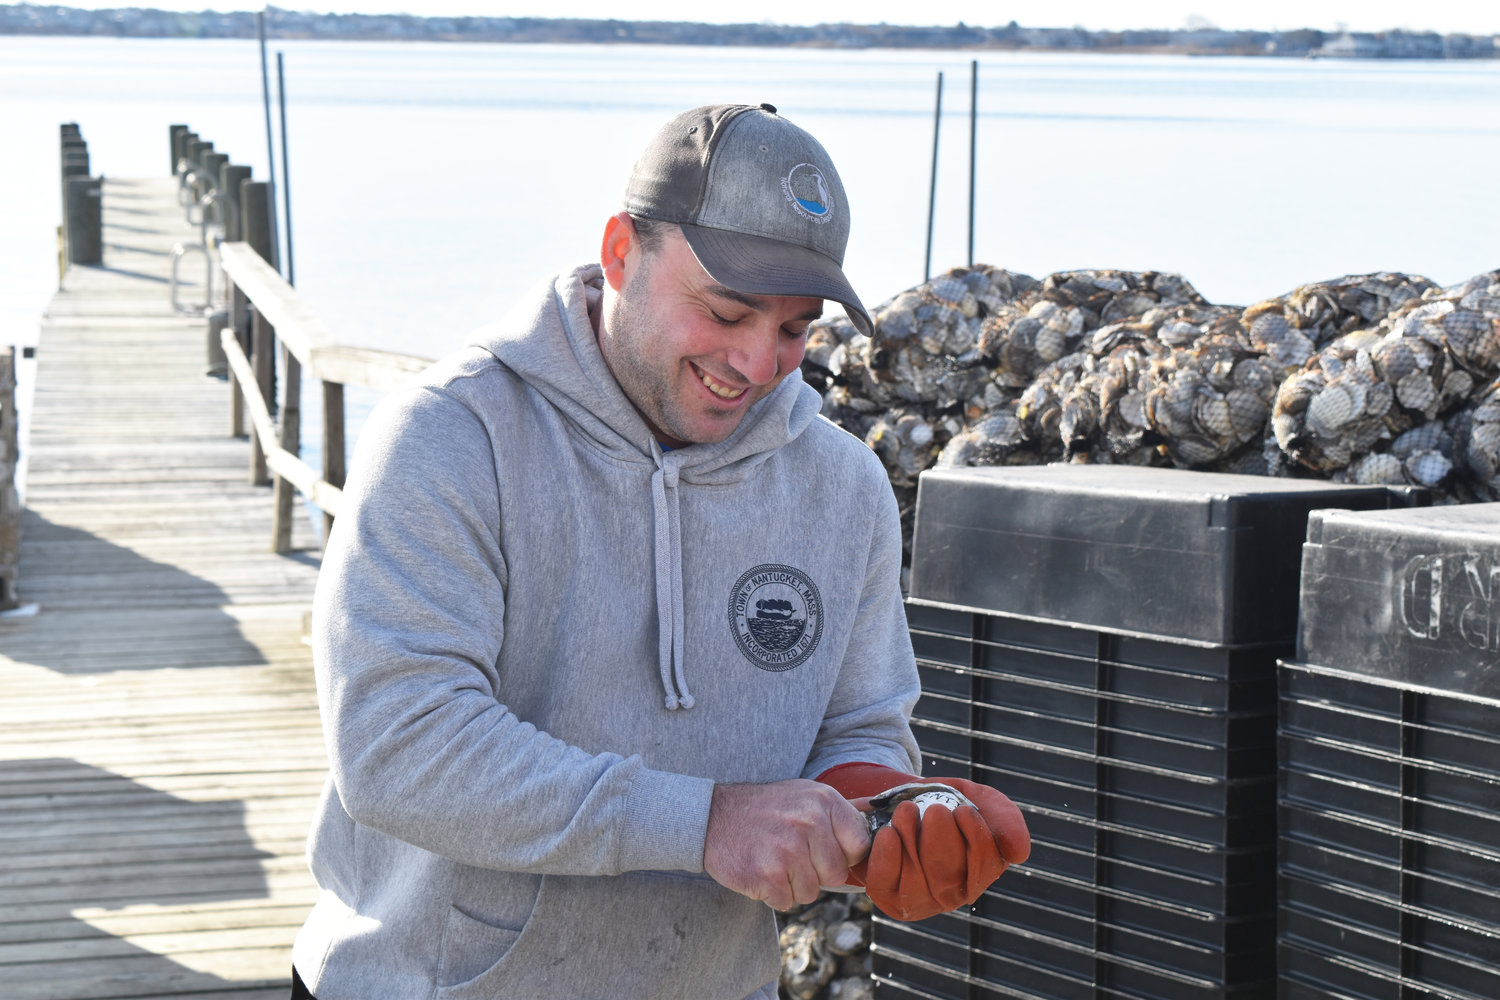 Nantucket shellfish hatchery technician Joe Minella opens Quentin the Quahog on the waterfront Thursday morning. Quentin squirted to the right, indicating spring is just around the corner.